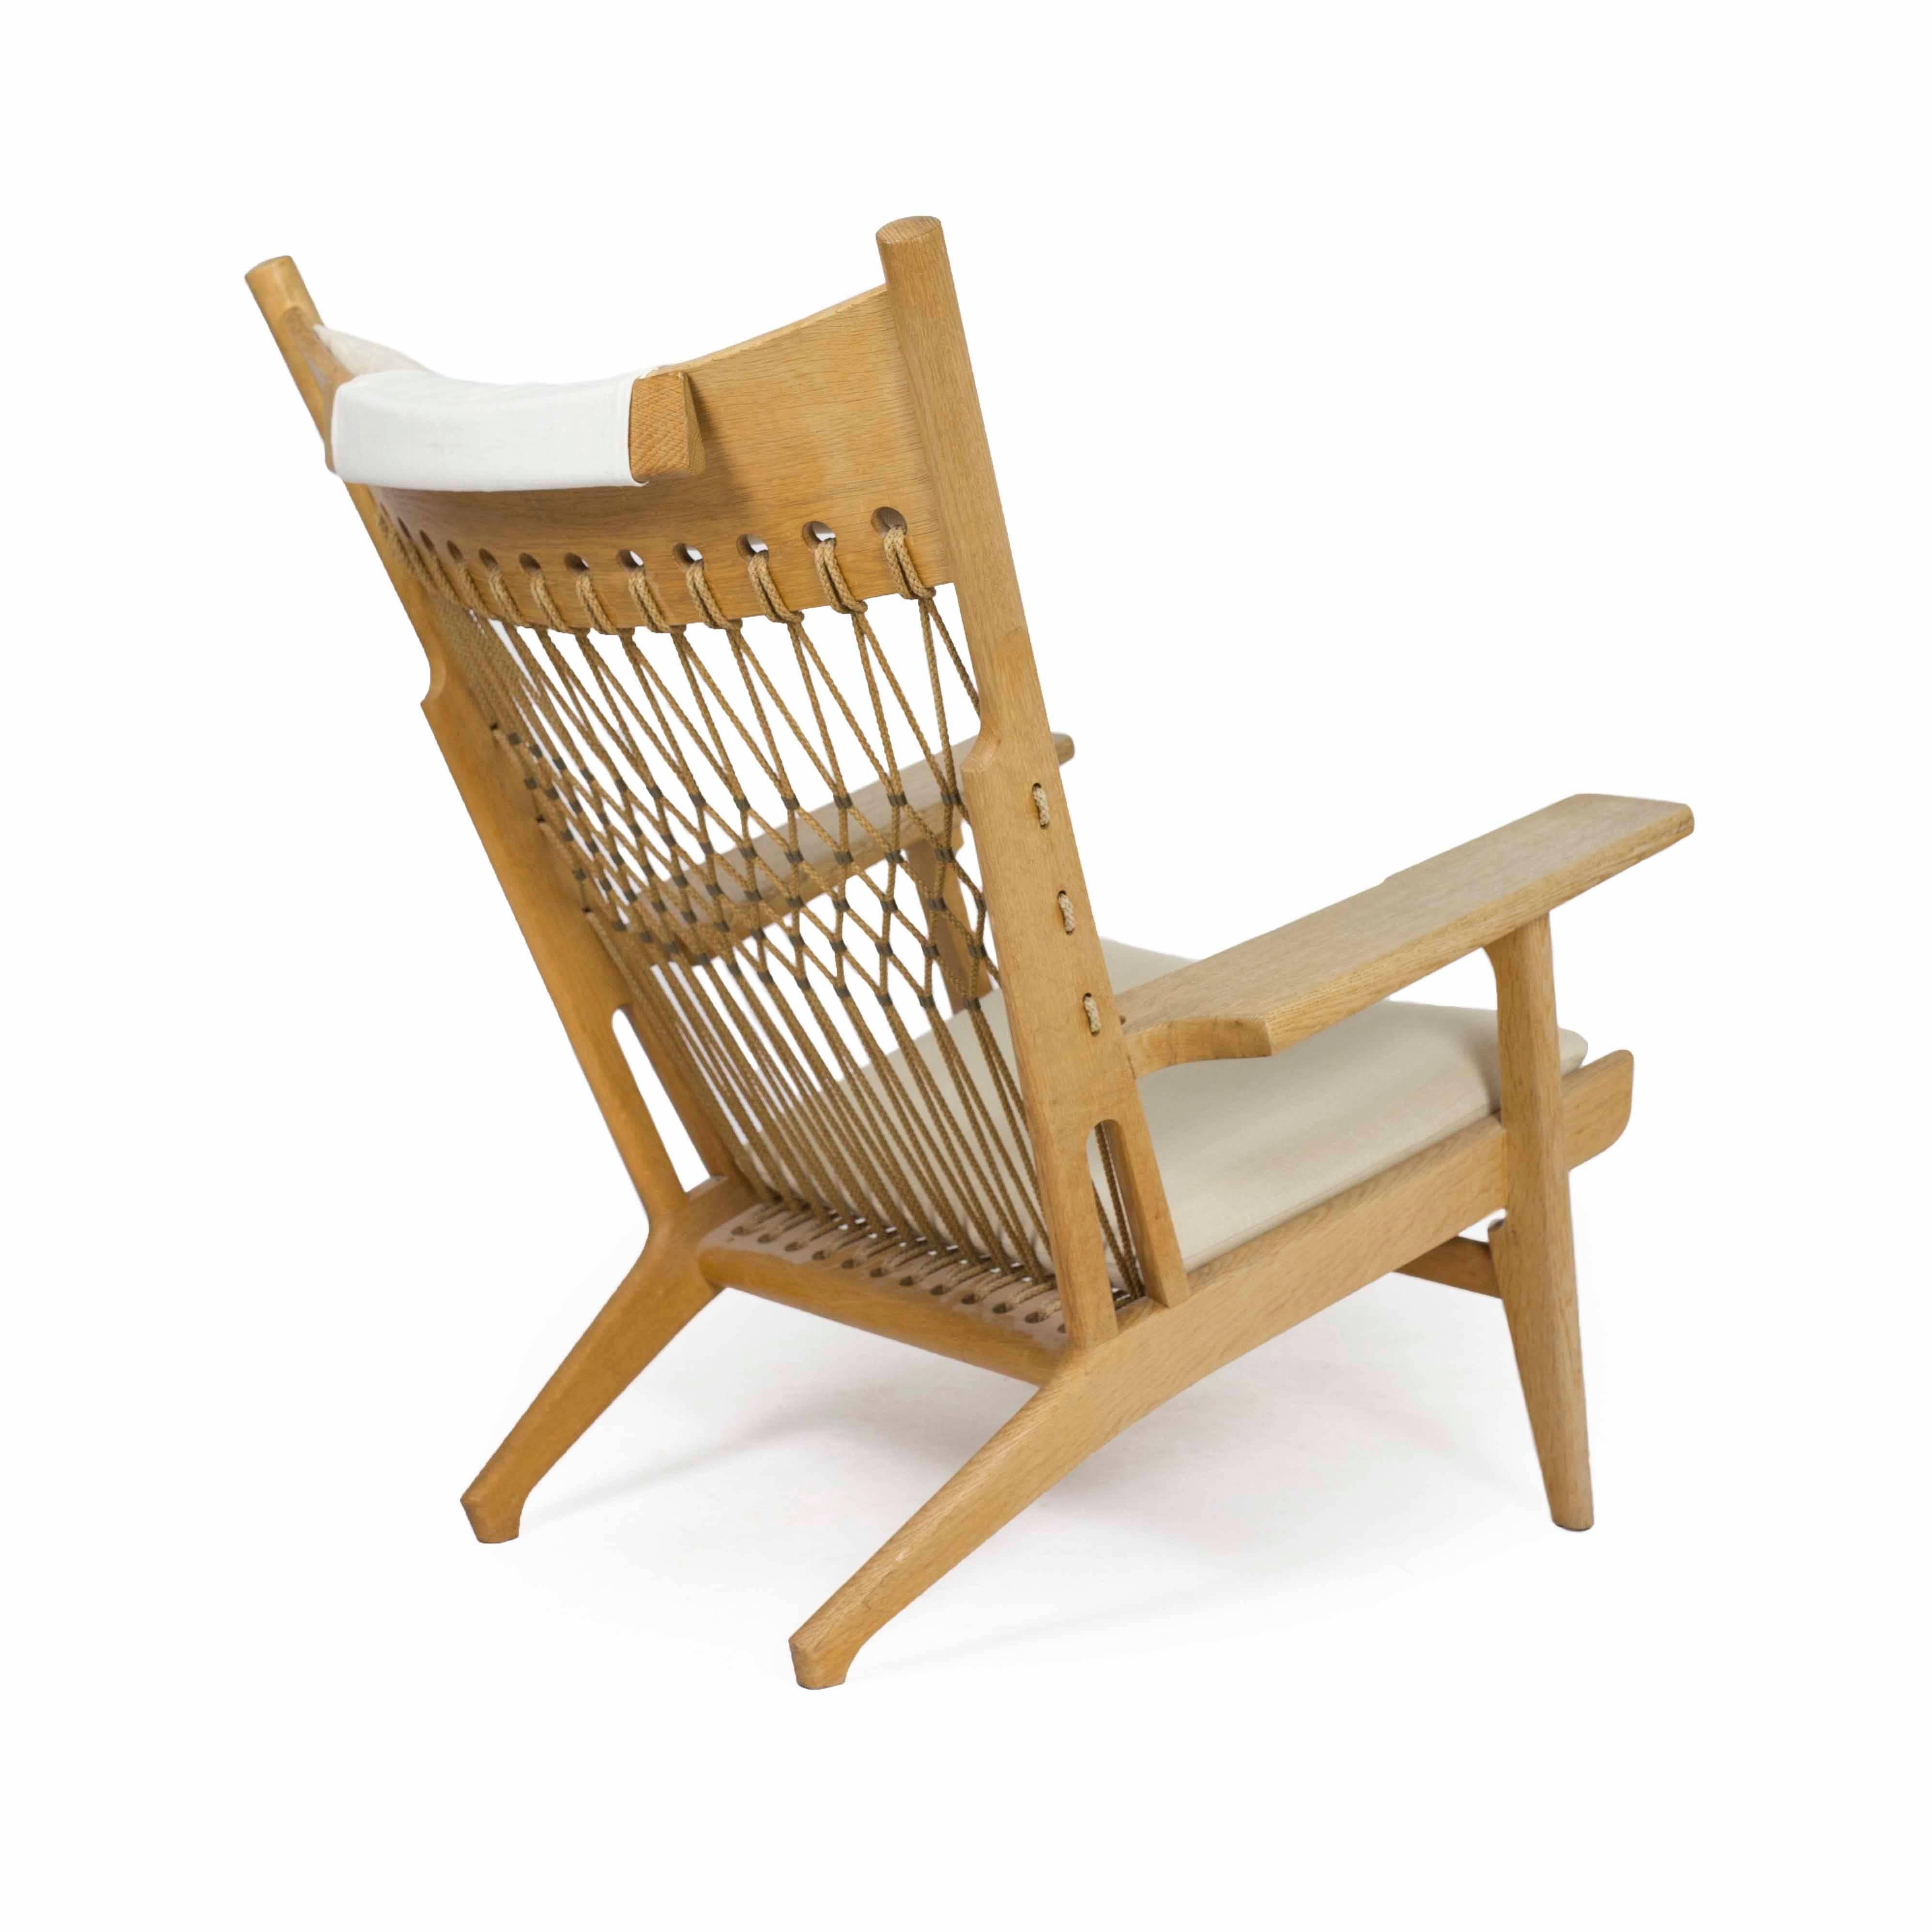 Rare Hans J. Wegner oak armchair model JH-719. 

Designed 1968 and made by cabinetmaker Johannes Hansen. 

Frame of oak, seat and back with woven halyard and brass details. Seat and head cushions upholstered with light fabric. 

Very fine